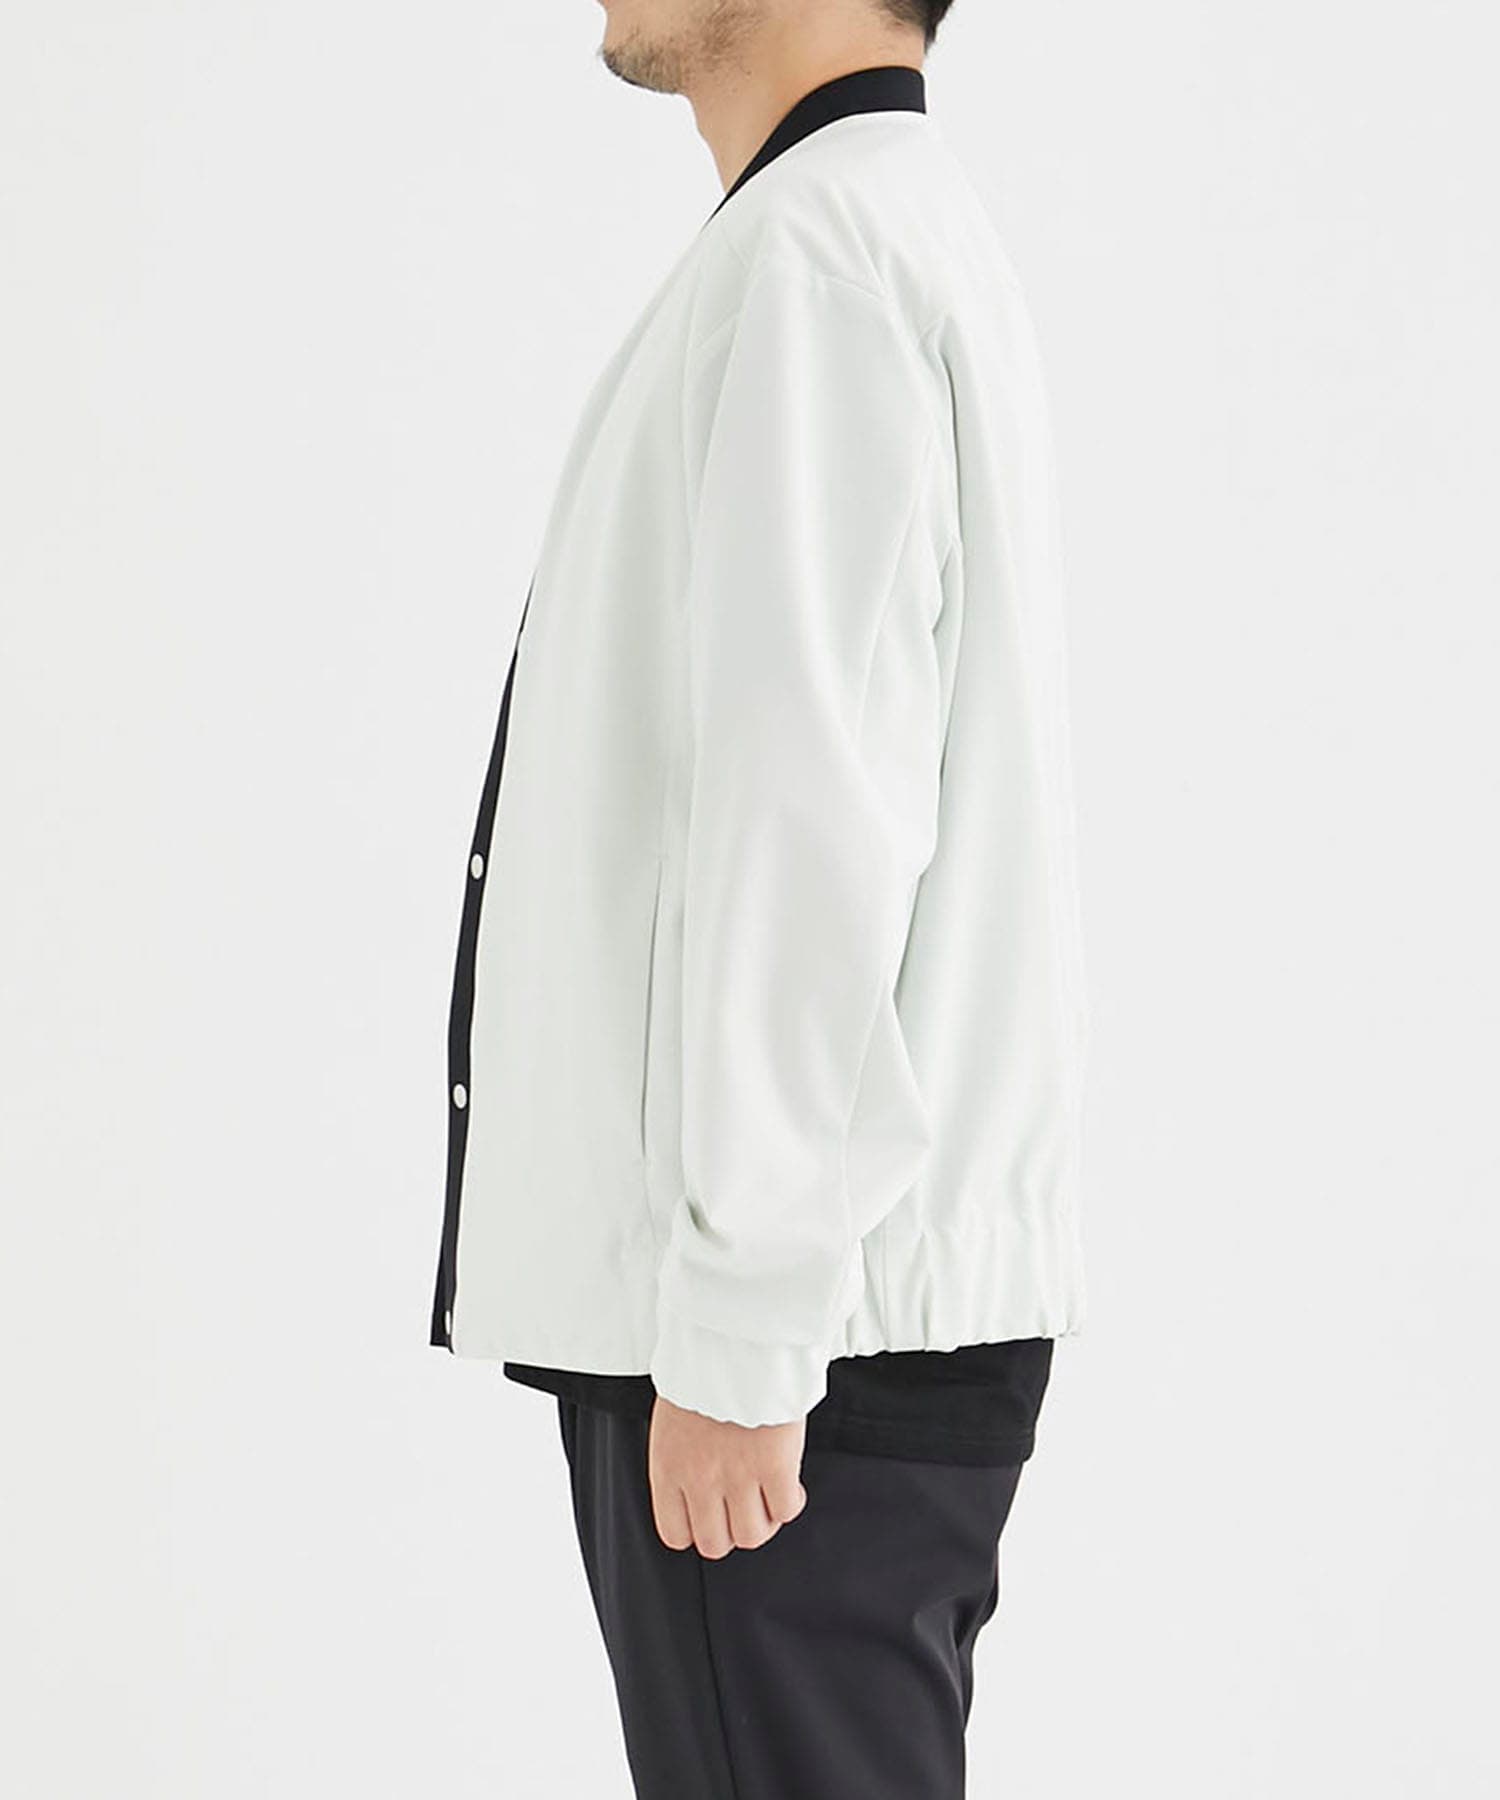 Washable High Function Jersey Snap Cardigan THE PERMANENT EYE